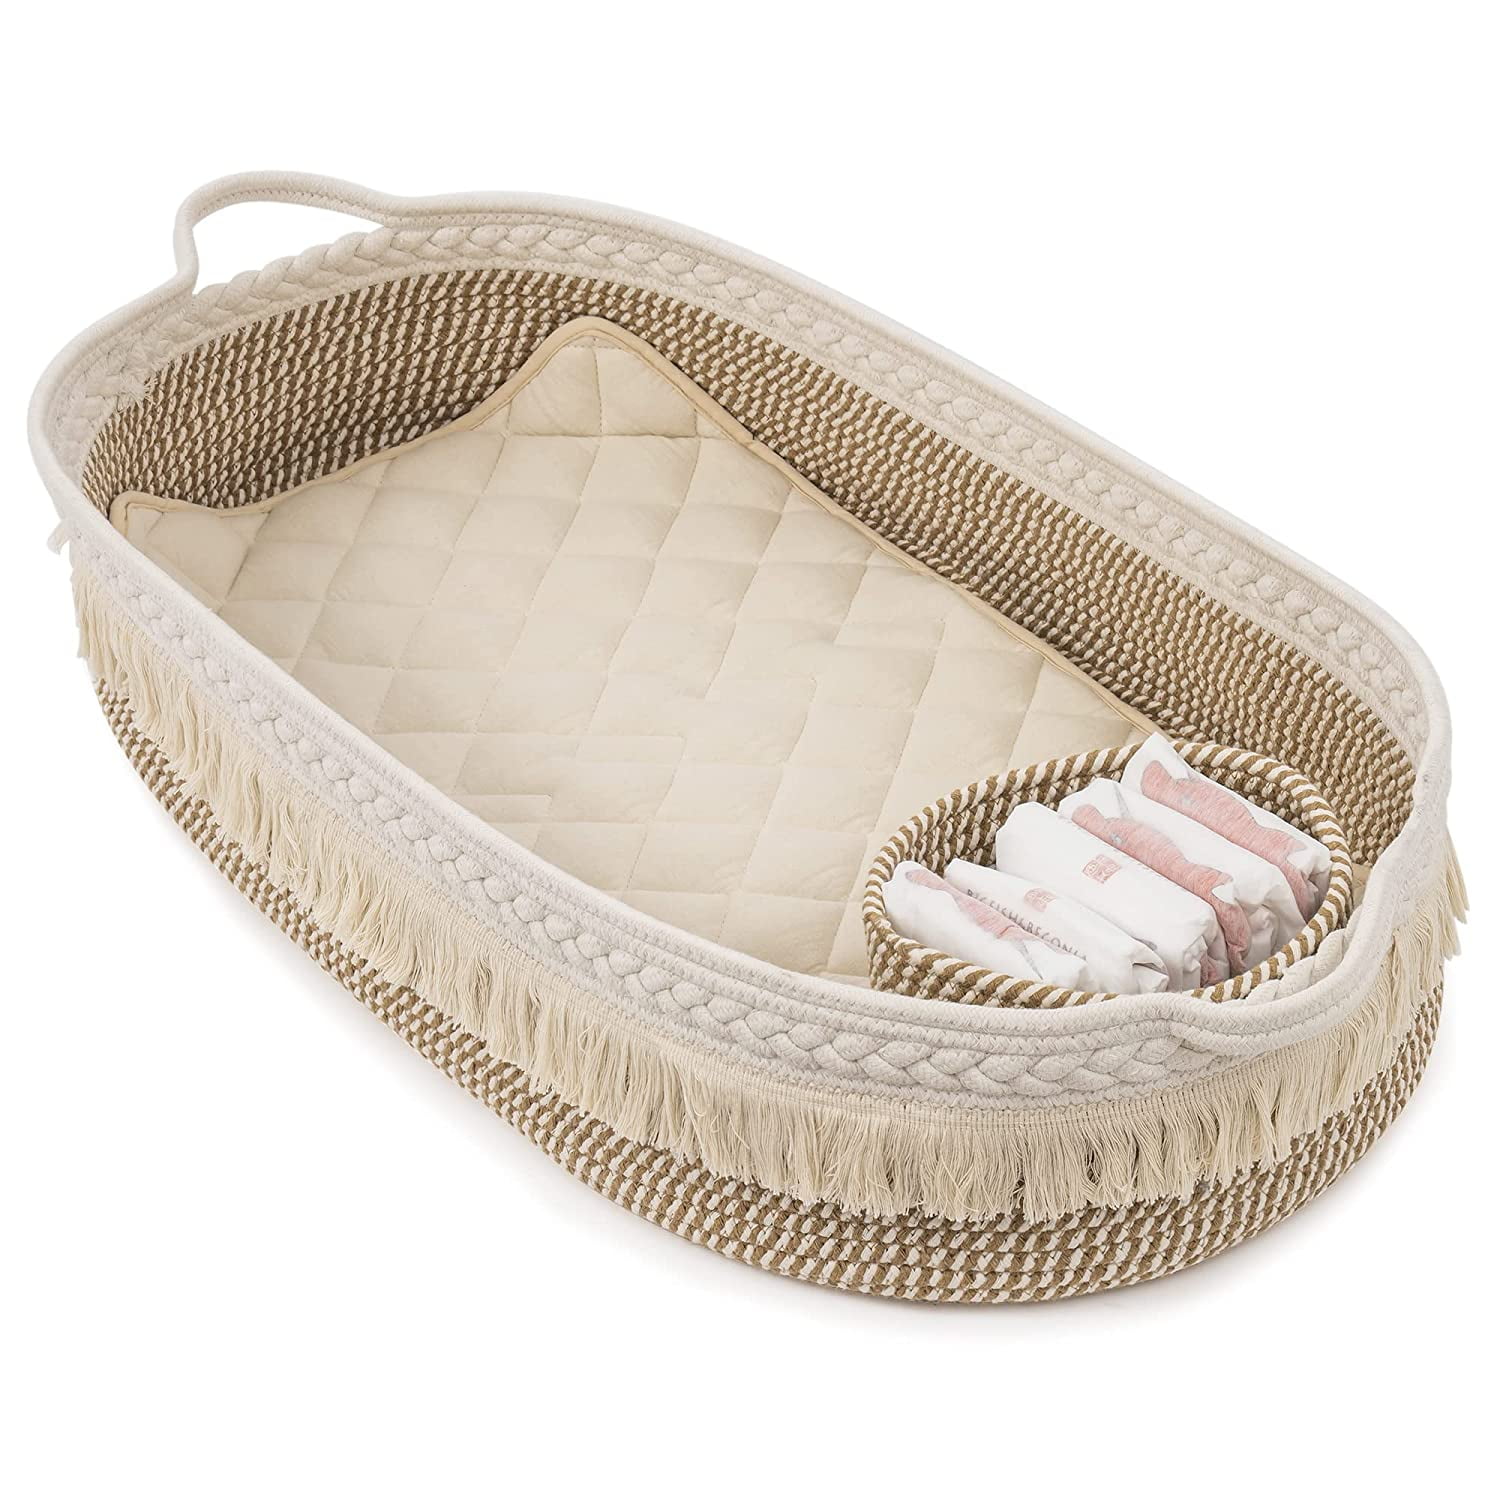 HARPPA Baby Changing Basket, Moses Basket with Waterproof Pad and Blanket,  Portable and Washable Woven Basket for Dresser and Diaper Changing Baby